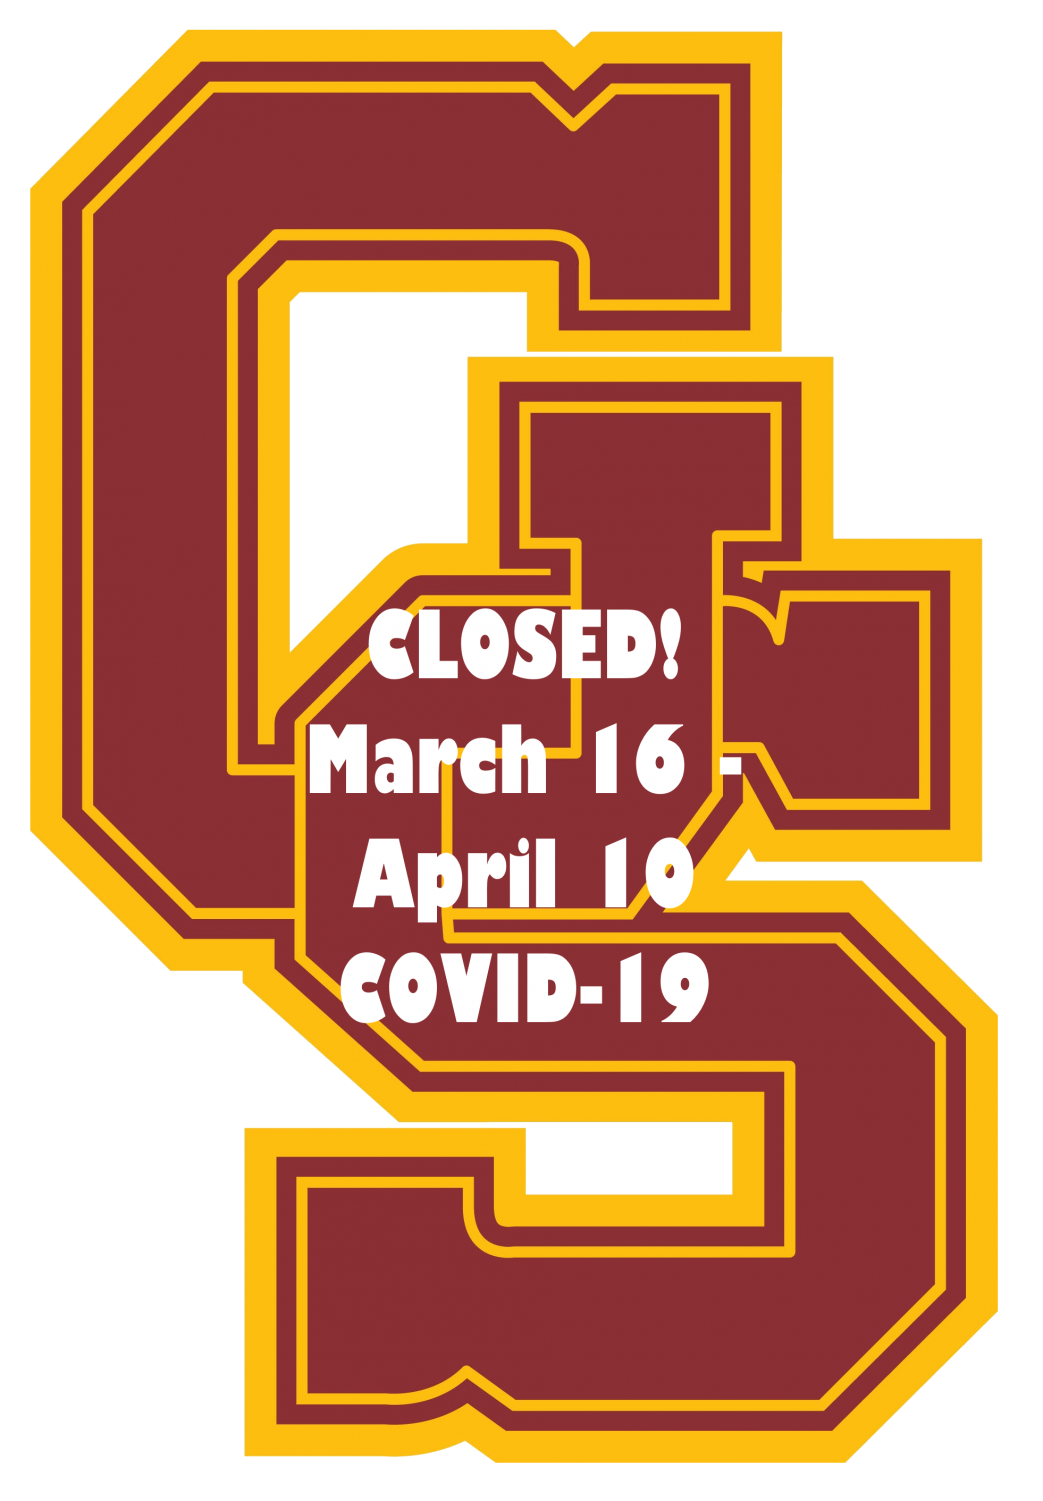 South Gibson Schools CLOSED March 16 – April 10 for COVID-19 social